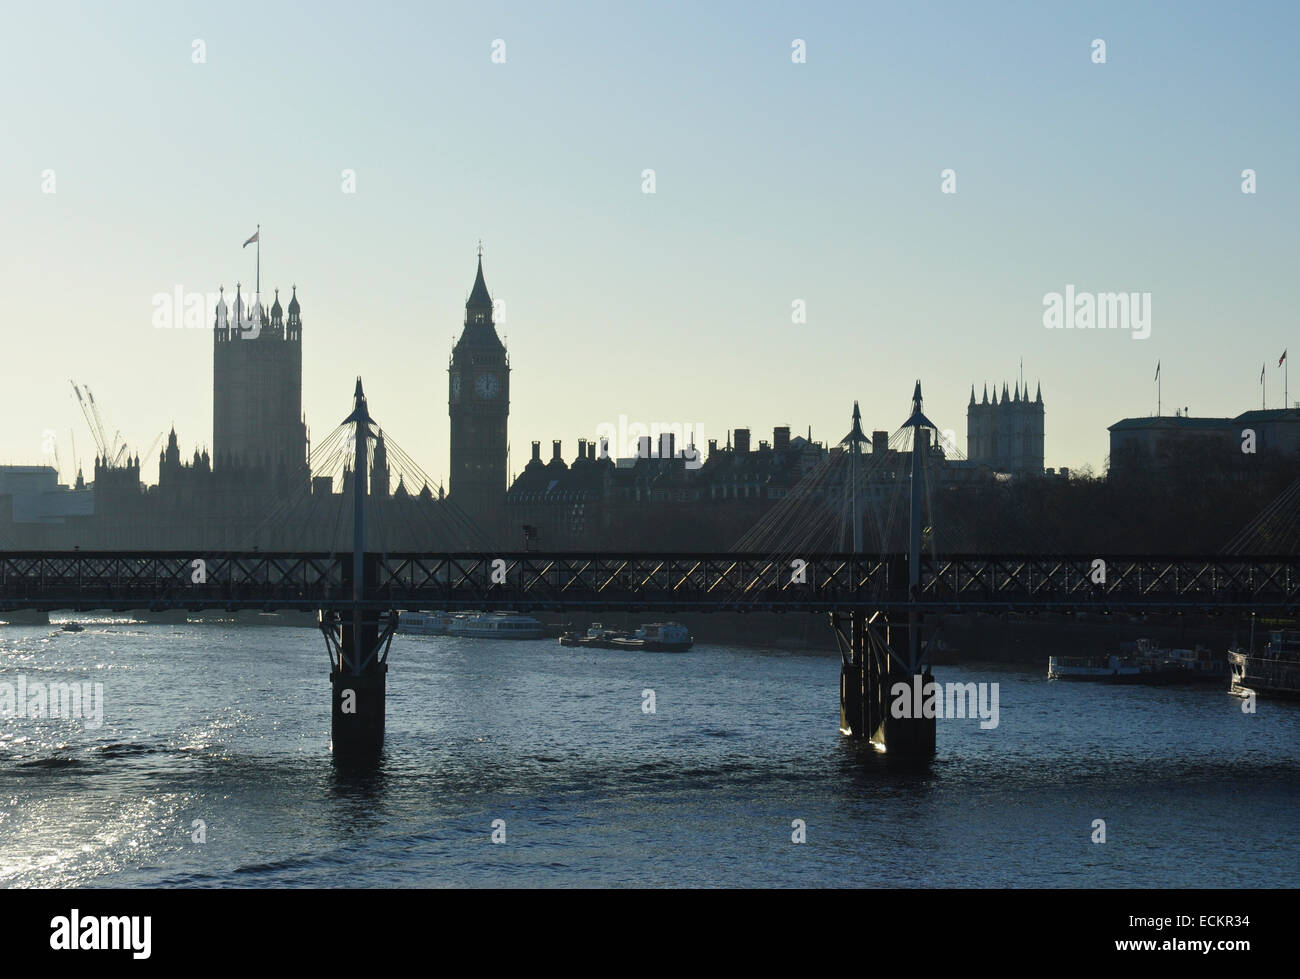 Semi-silhouette of Hungerford Bridge and Palace of Westminster, London, England, UK Stock Photo